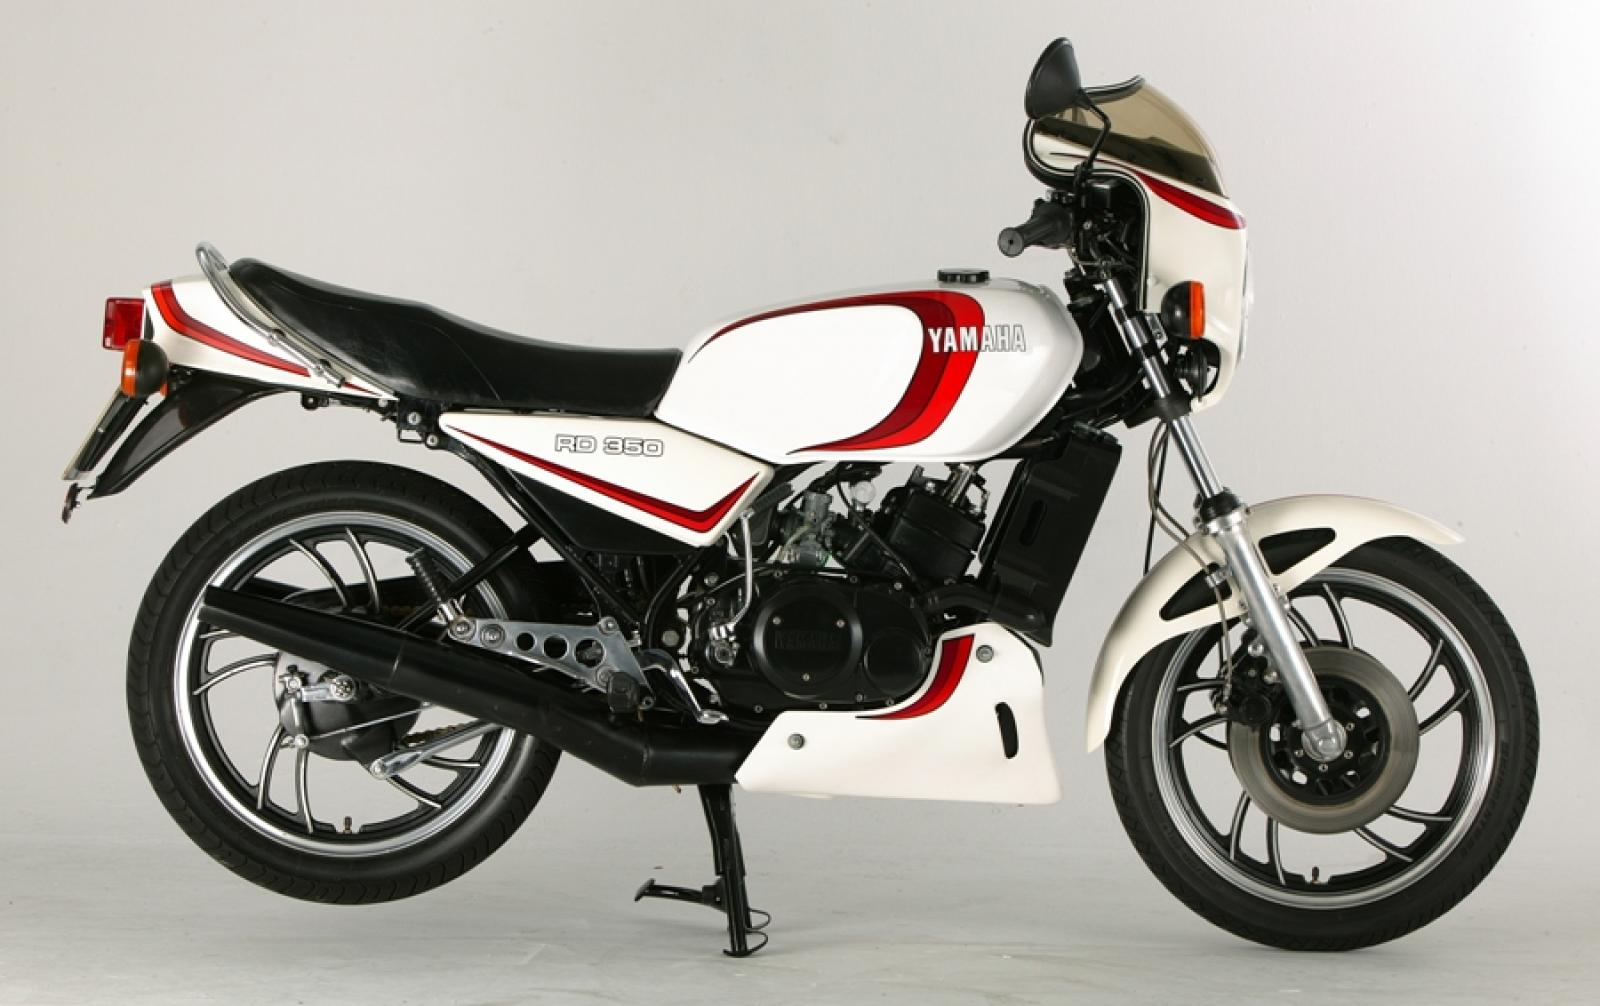 Yamaha RD 250 LC (reduced effect) 1982 photo - 3